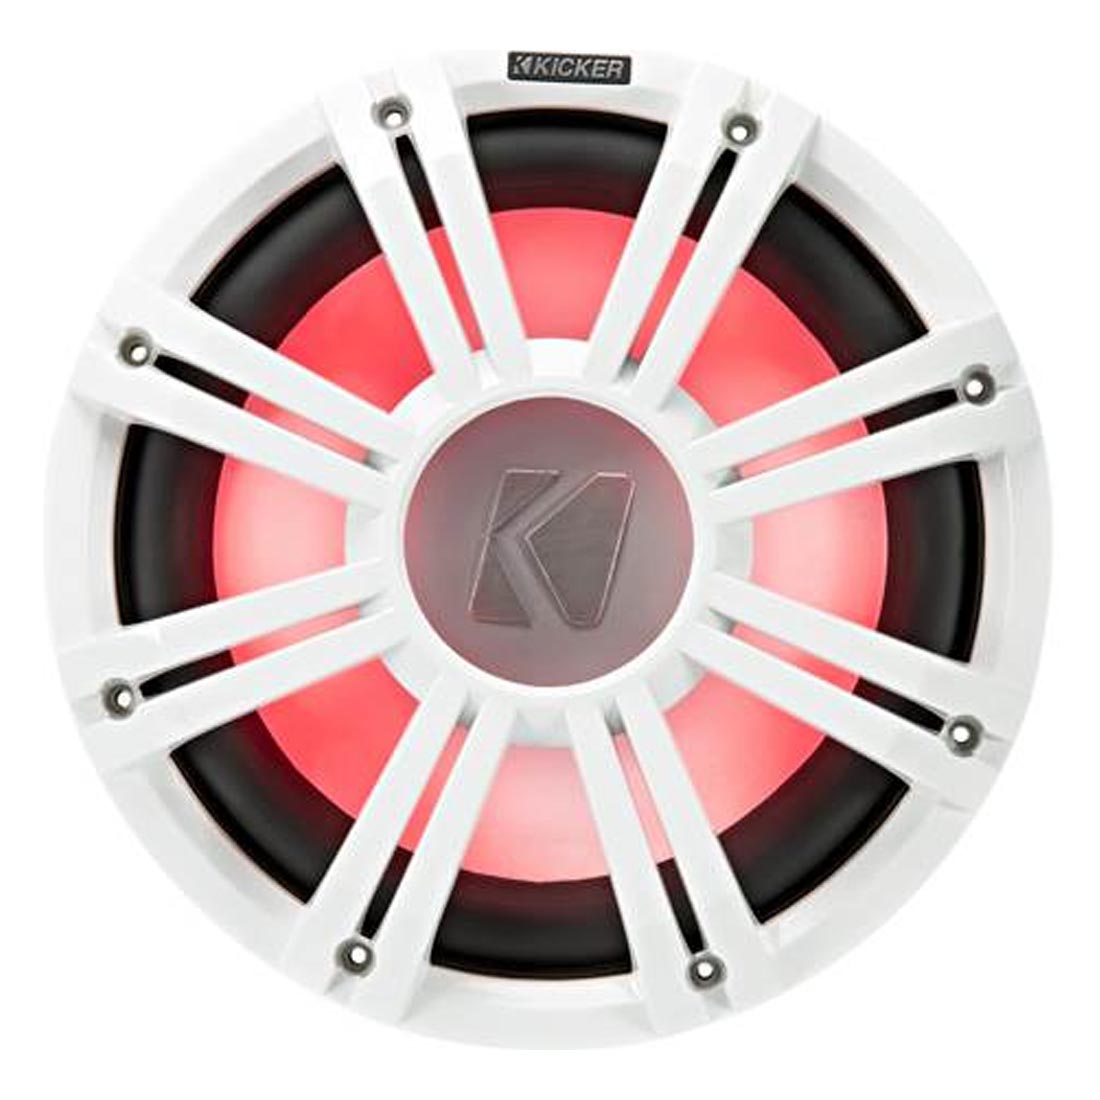 Kicker 45KMG10W 10″ LED Marine Subwoofer Grille — for KM10 and KMF10 Subs – White – Each